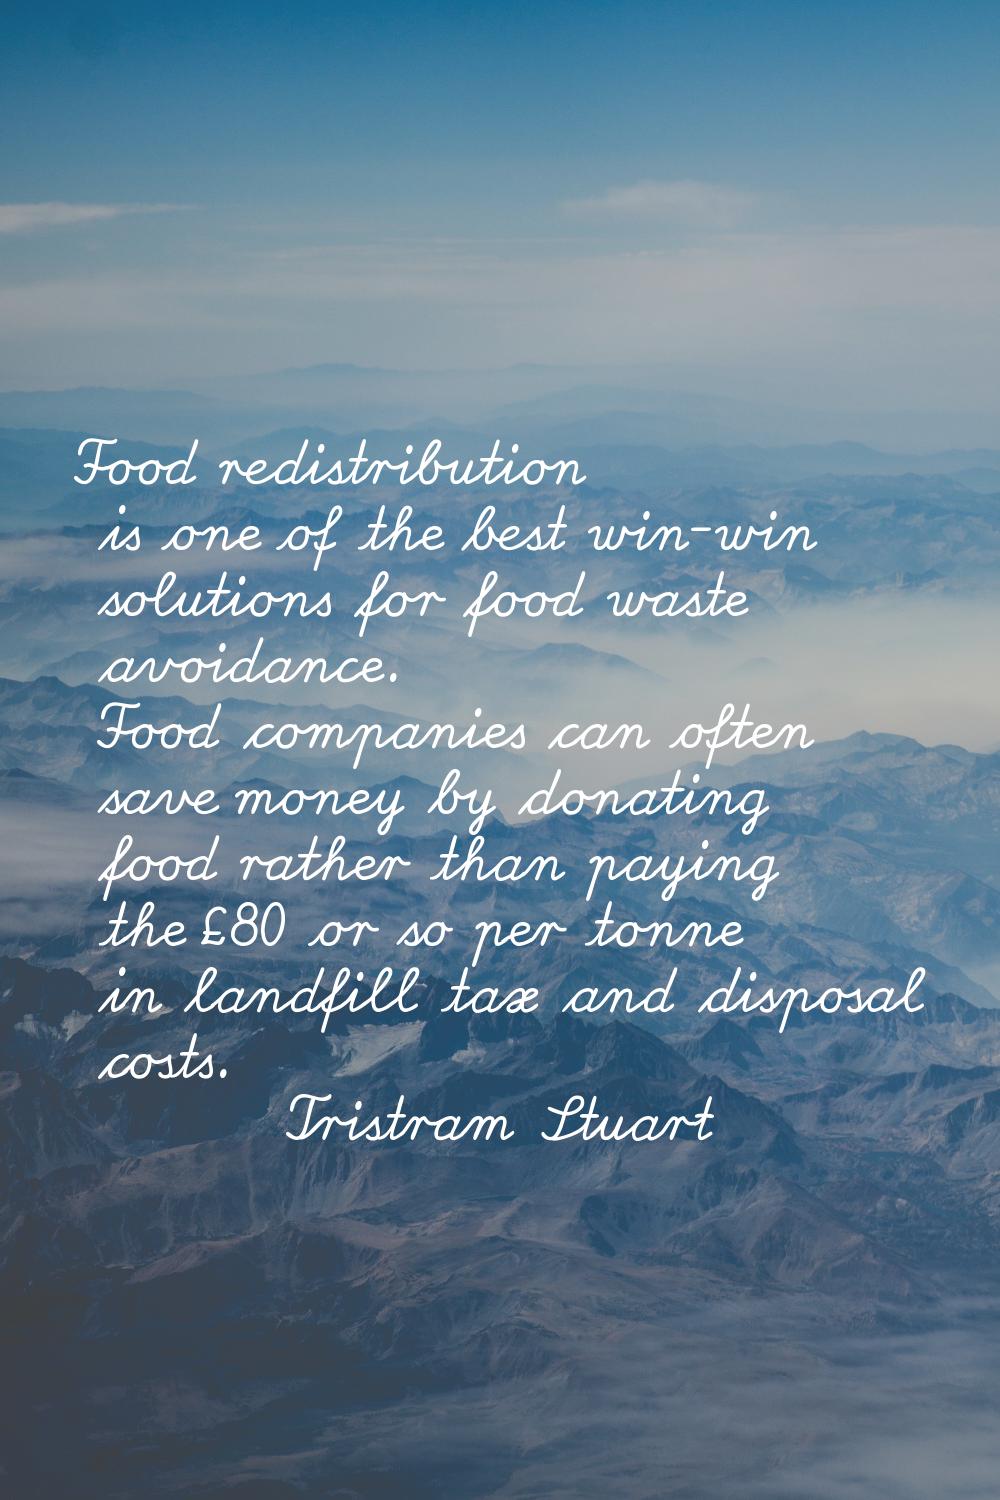 Food redistribution is one of the best win-win solutions for food waste avoidance. Food companies c